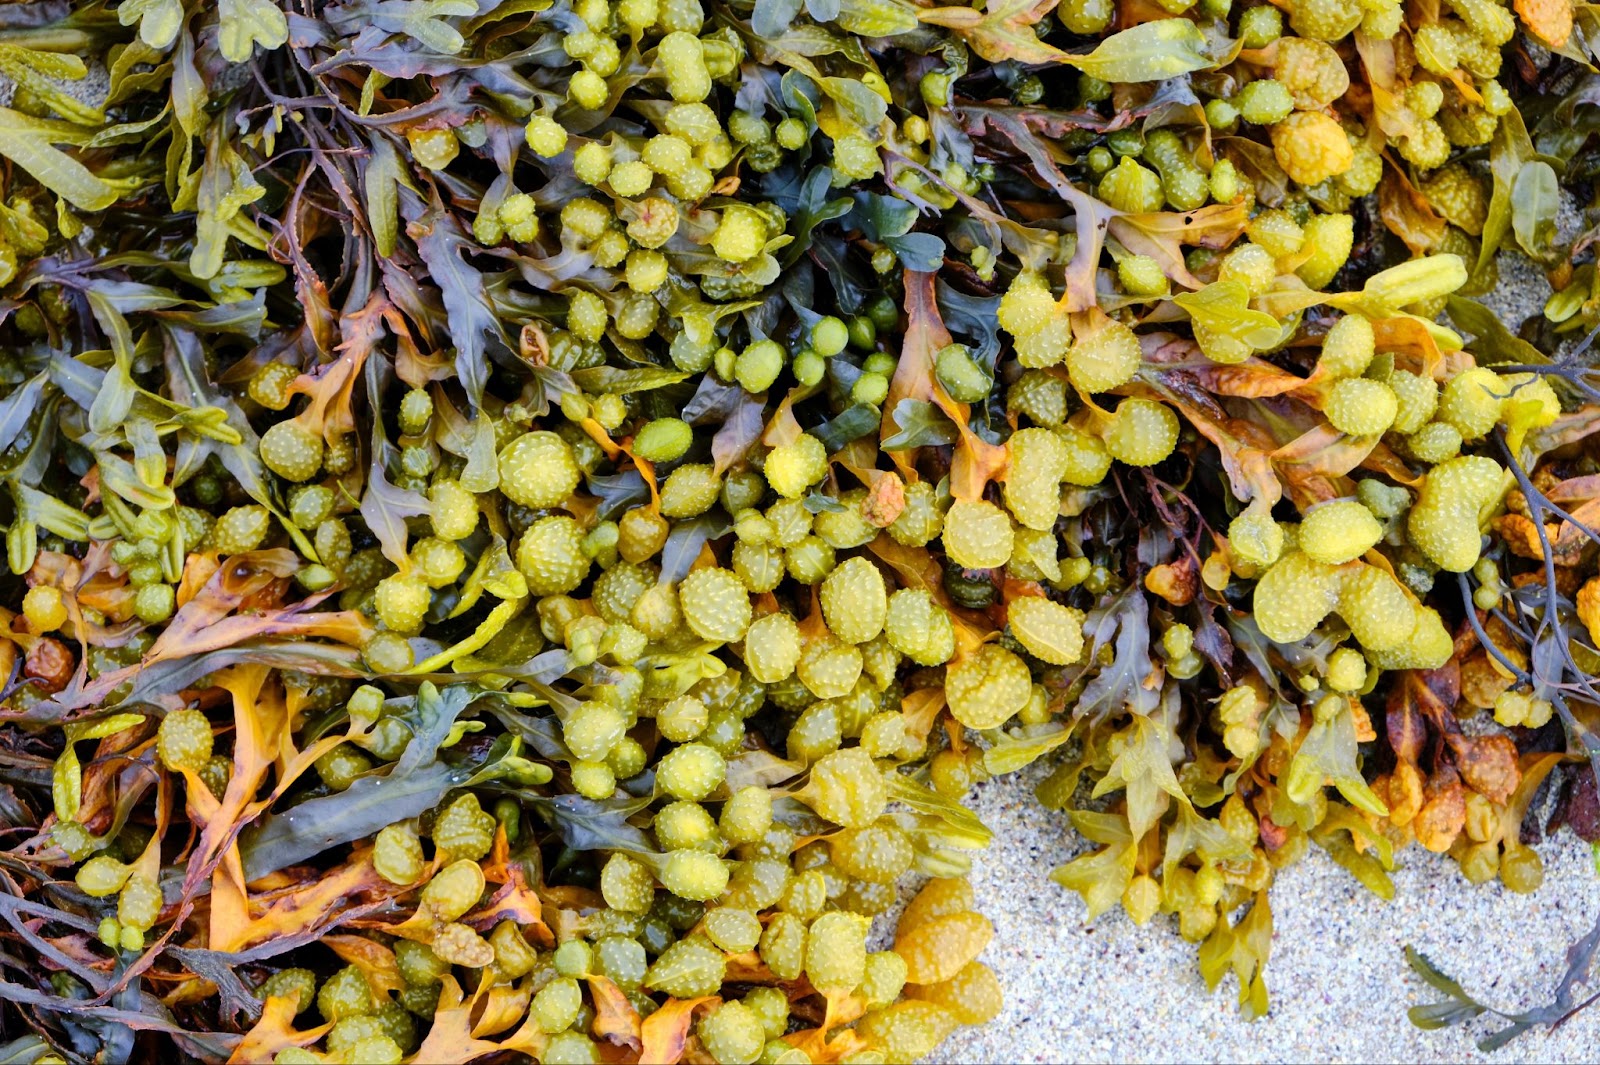 Benefits, uses, and history of Bladderwrack